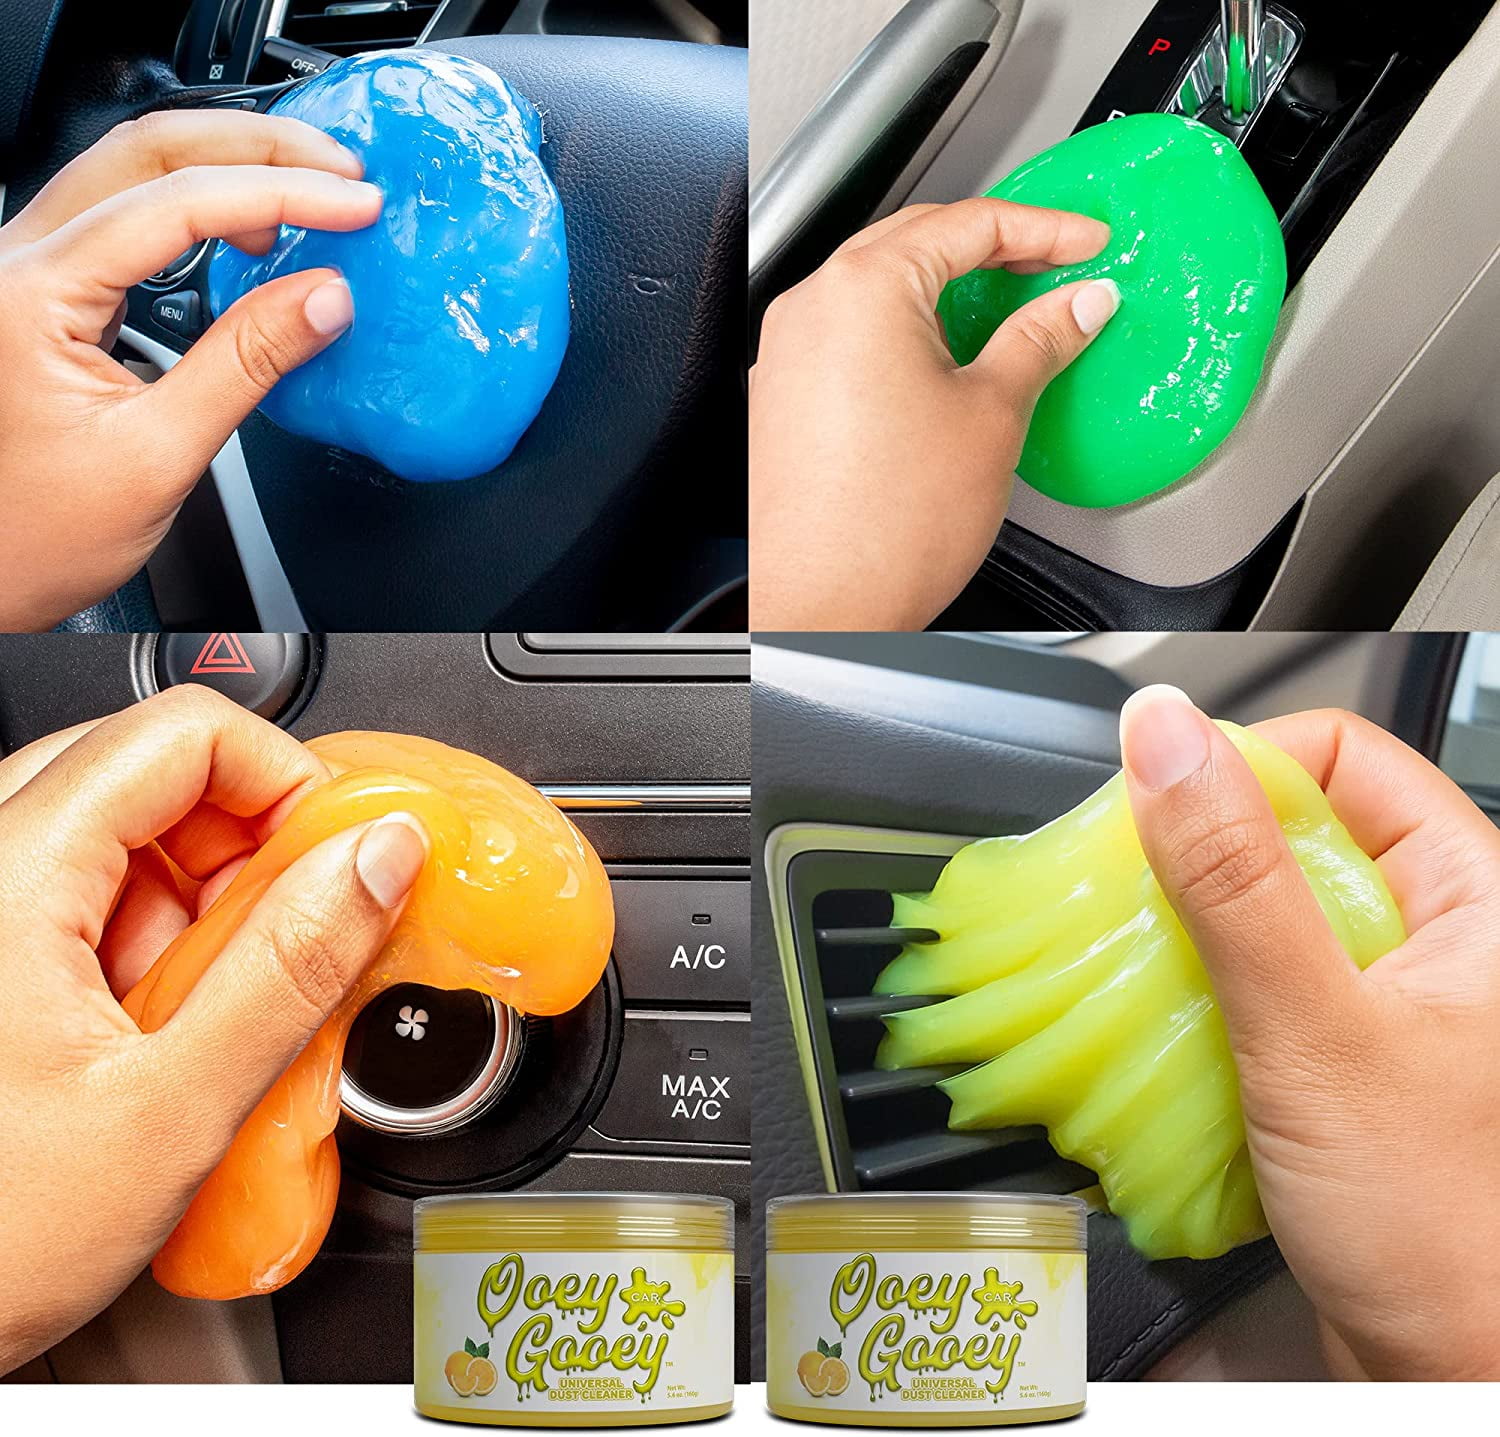 CarX Scented Car Cleaning Gel for Detailing - Pack of 2 Biodegradable Slime for Cleaning Car Interior - Perfect Keyboard Cleaner Gel to Make Your